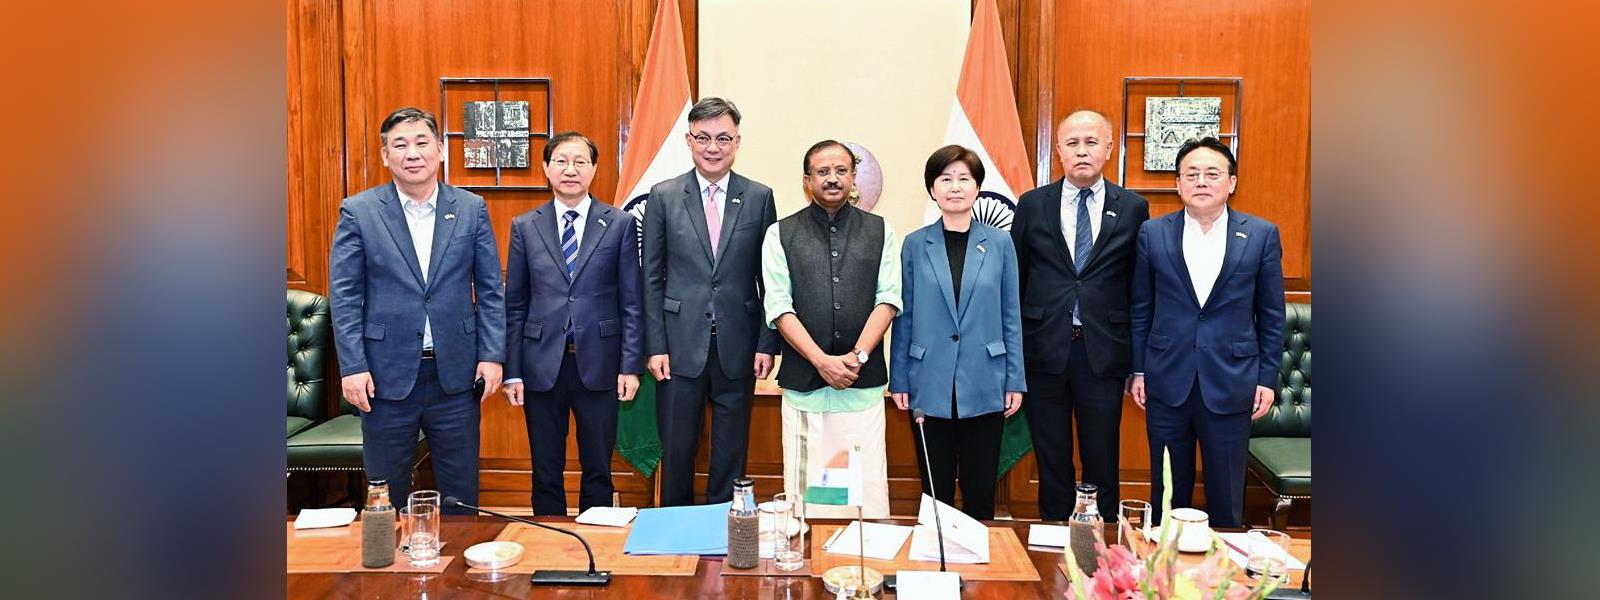 Minister of State for External Affairs Shri V. Muraleedharan  received a Parliamentary delegation from Republic of Korea in New Delhi